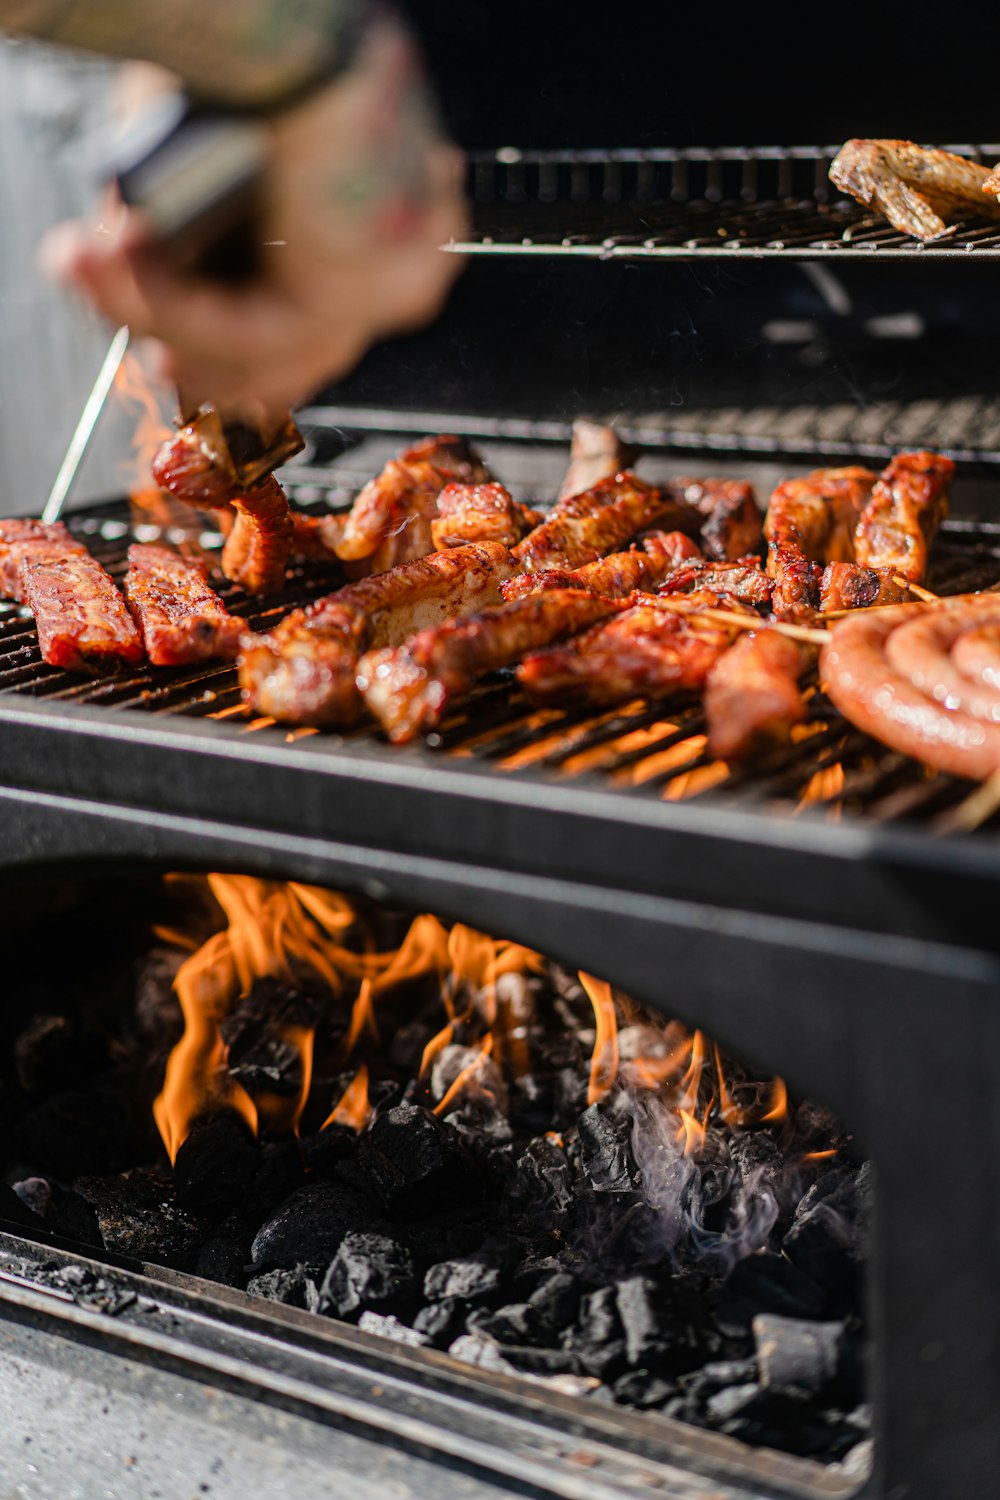 a person grilling hot dogs and sausages on a grill